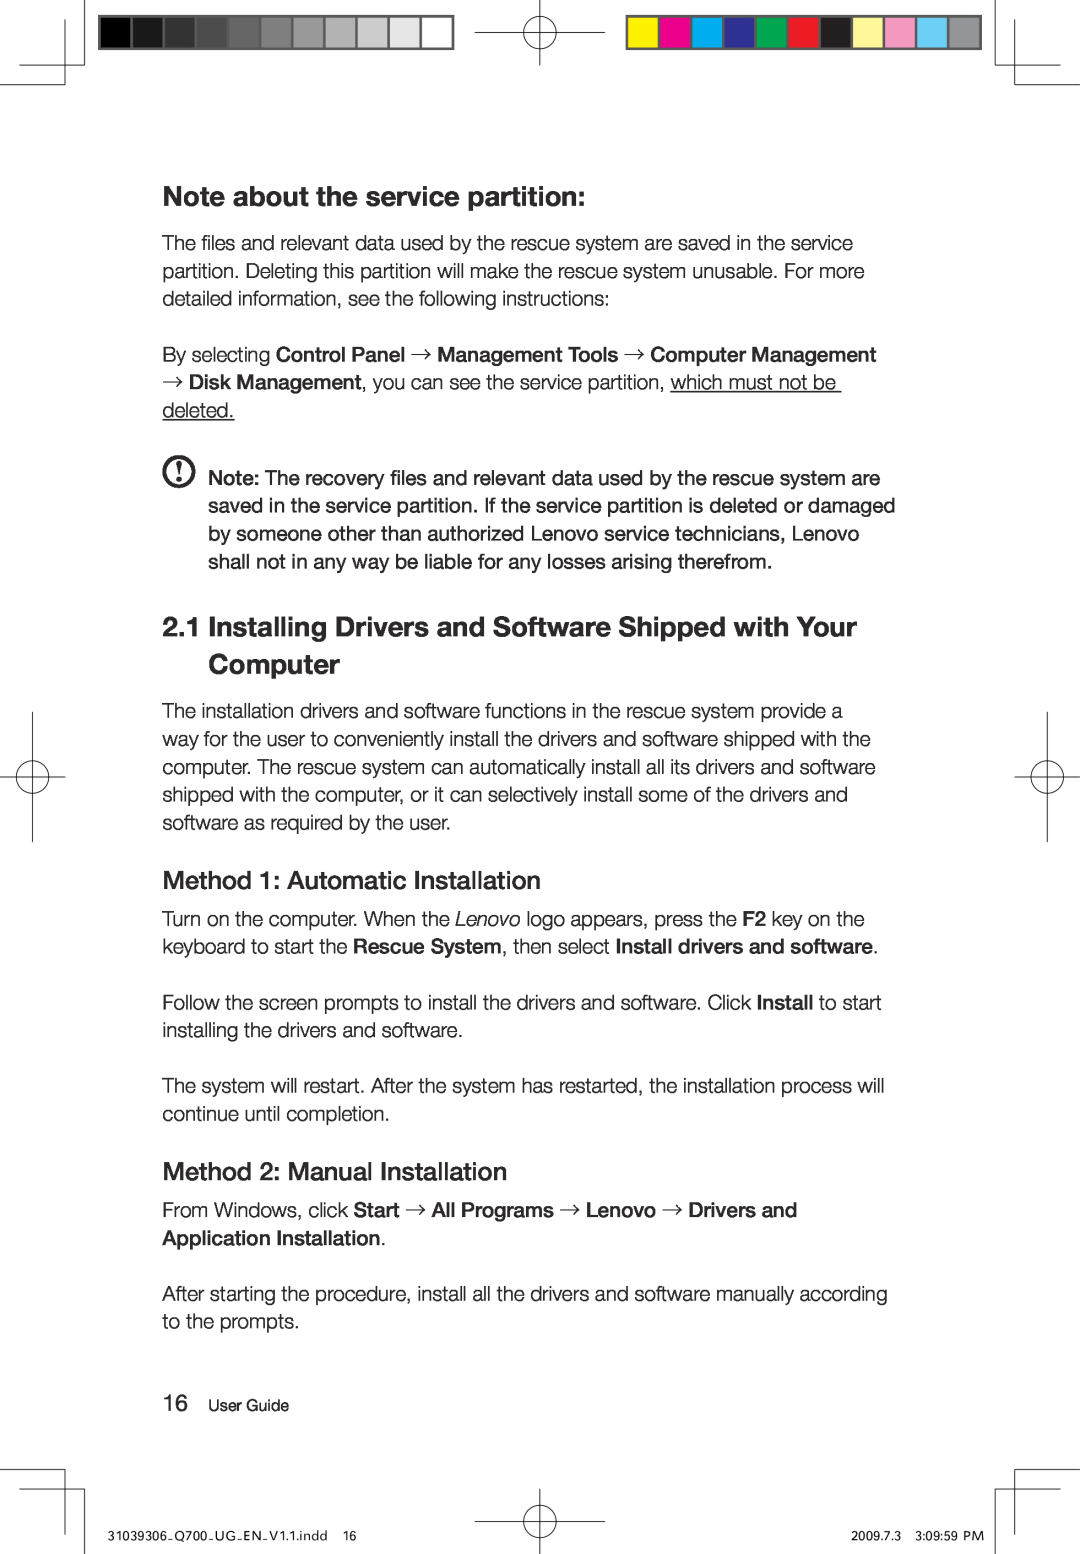 Lenovo Q700 manual Note about the service partition, Installing Drivers and Software Shipped with Your Computer 